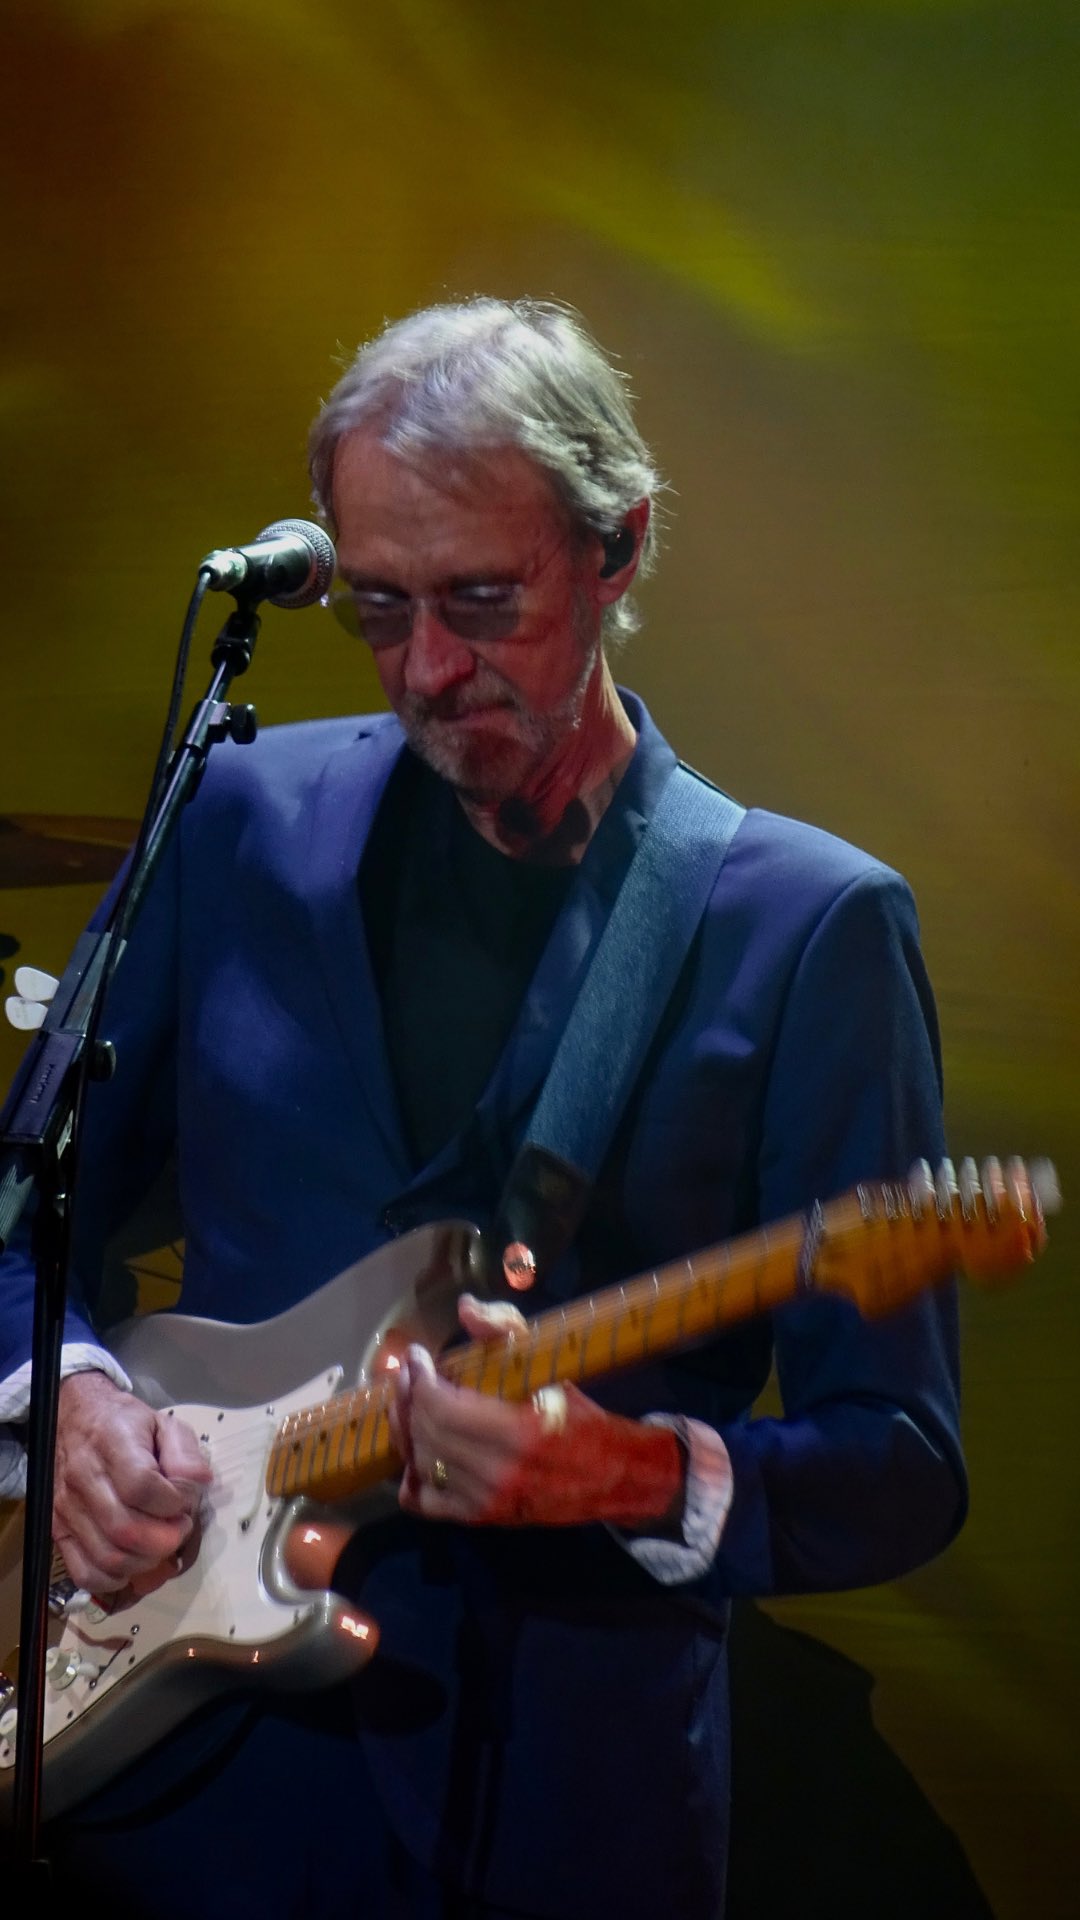 I knew I had a picture of Mike somewhere in my archives from 2019 Happy Birthday Mike Rutherford 